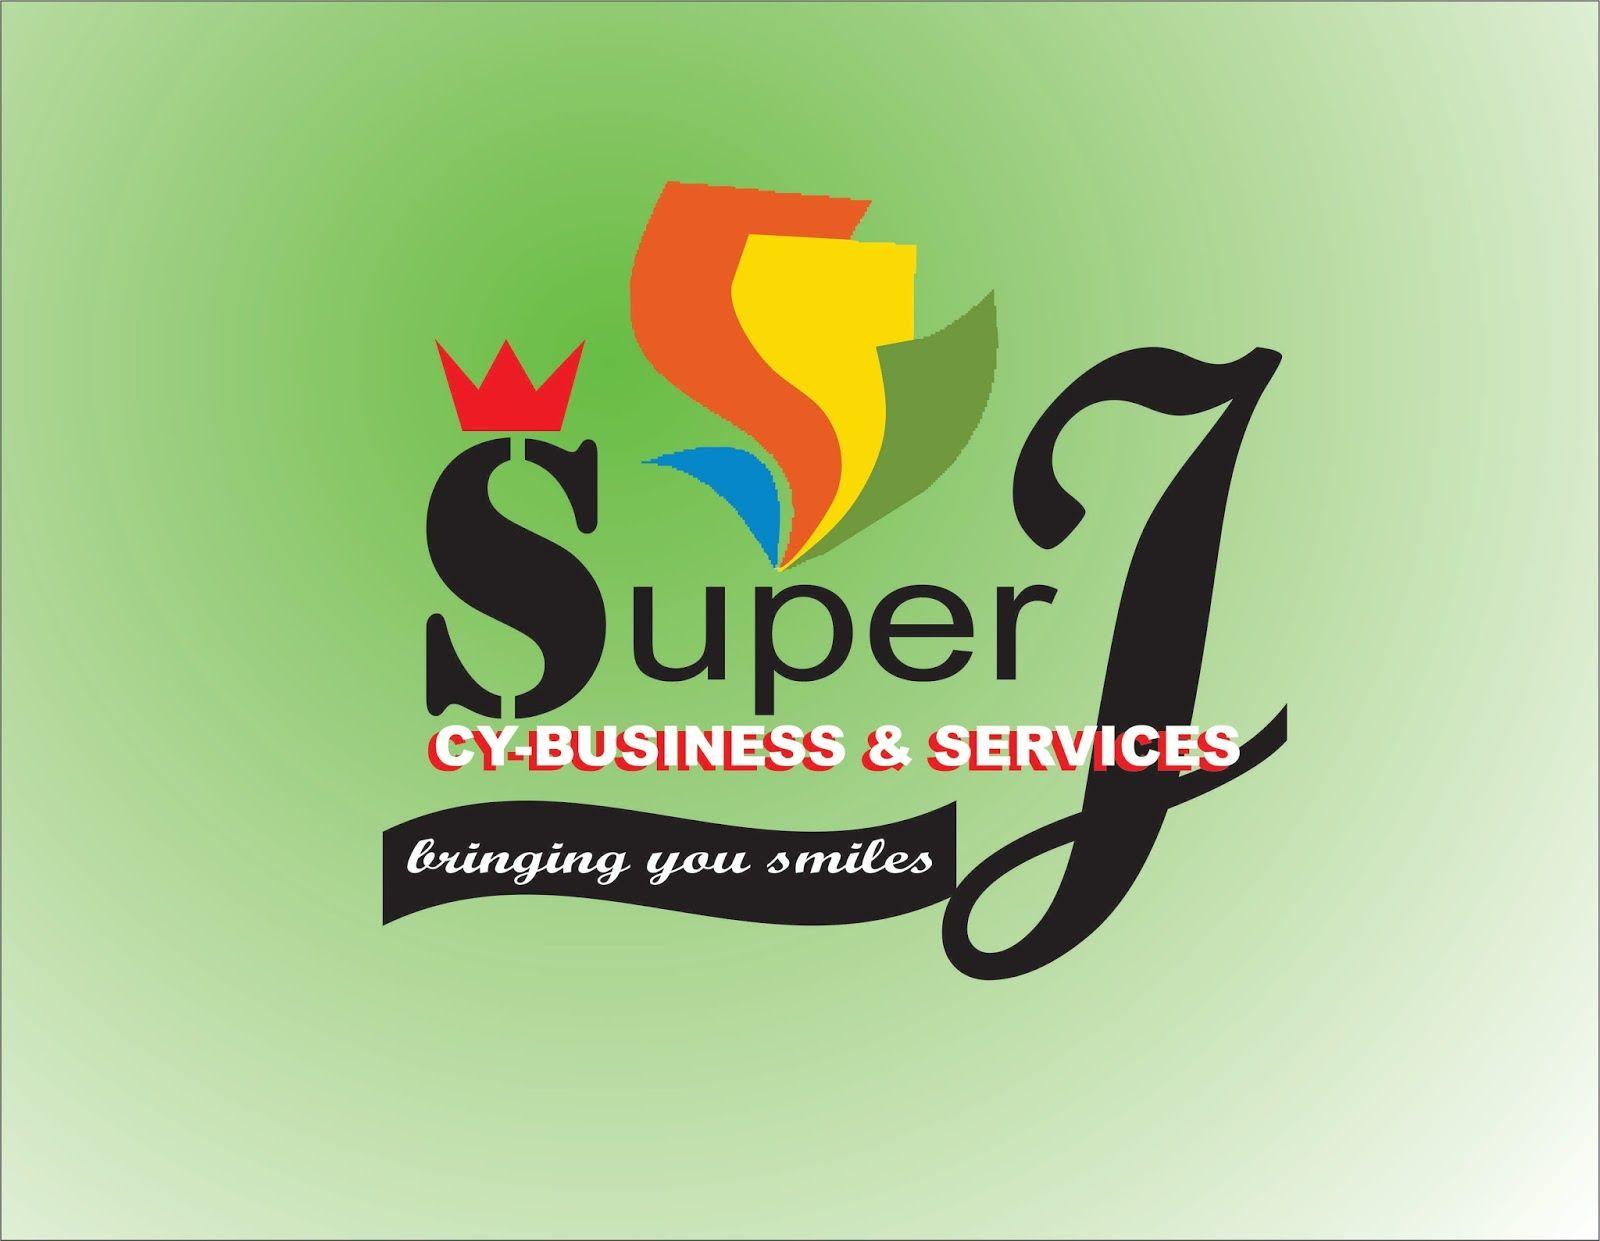 Super J Logo - SUPER J CY-BUSINESS AND SERVICES: March 2018